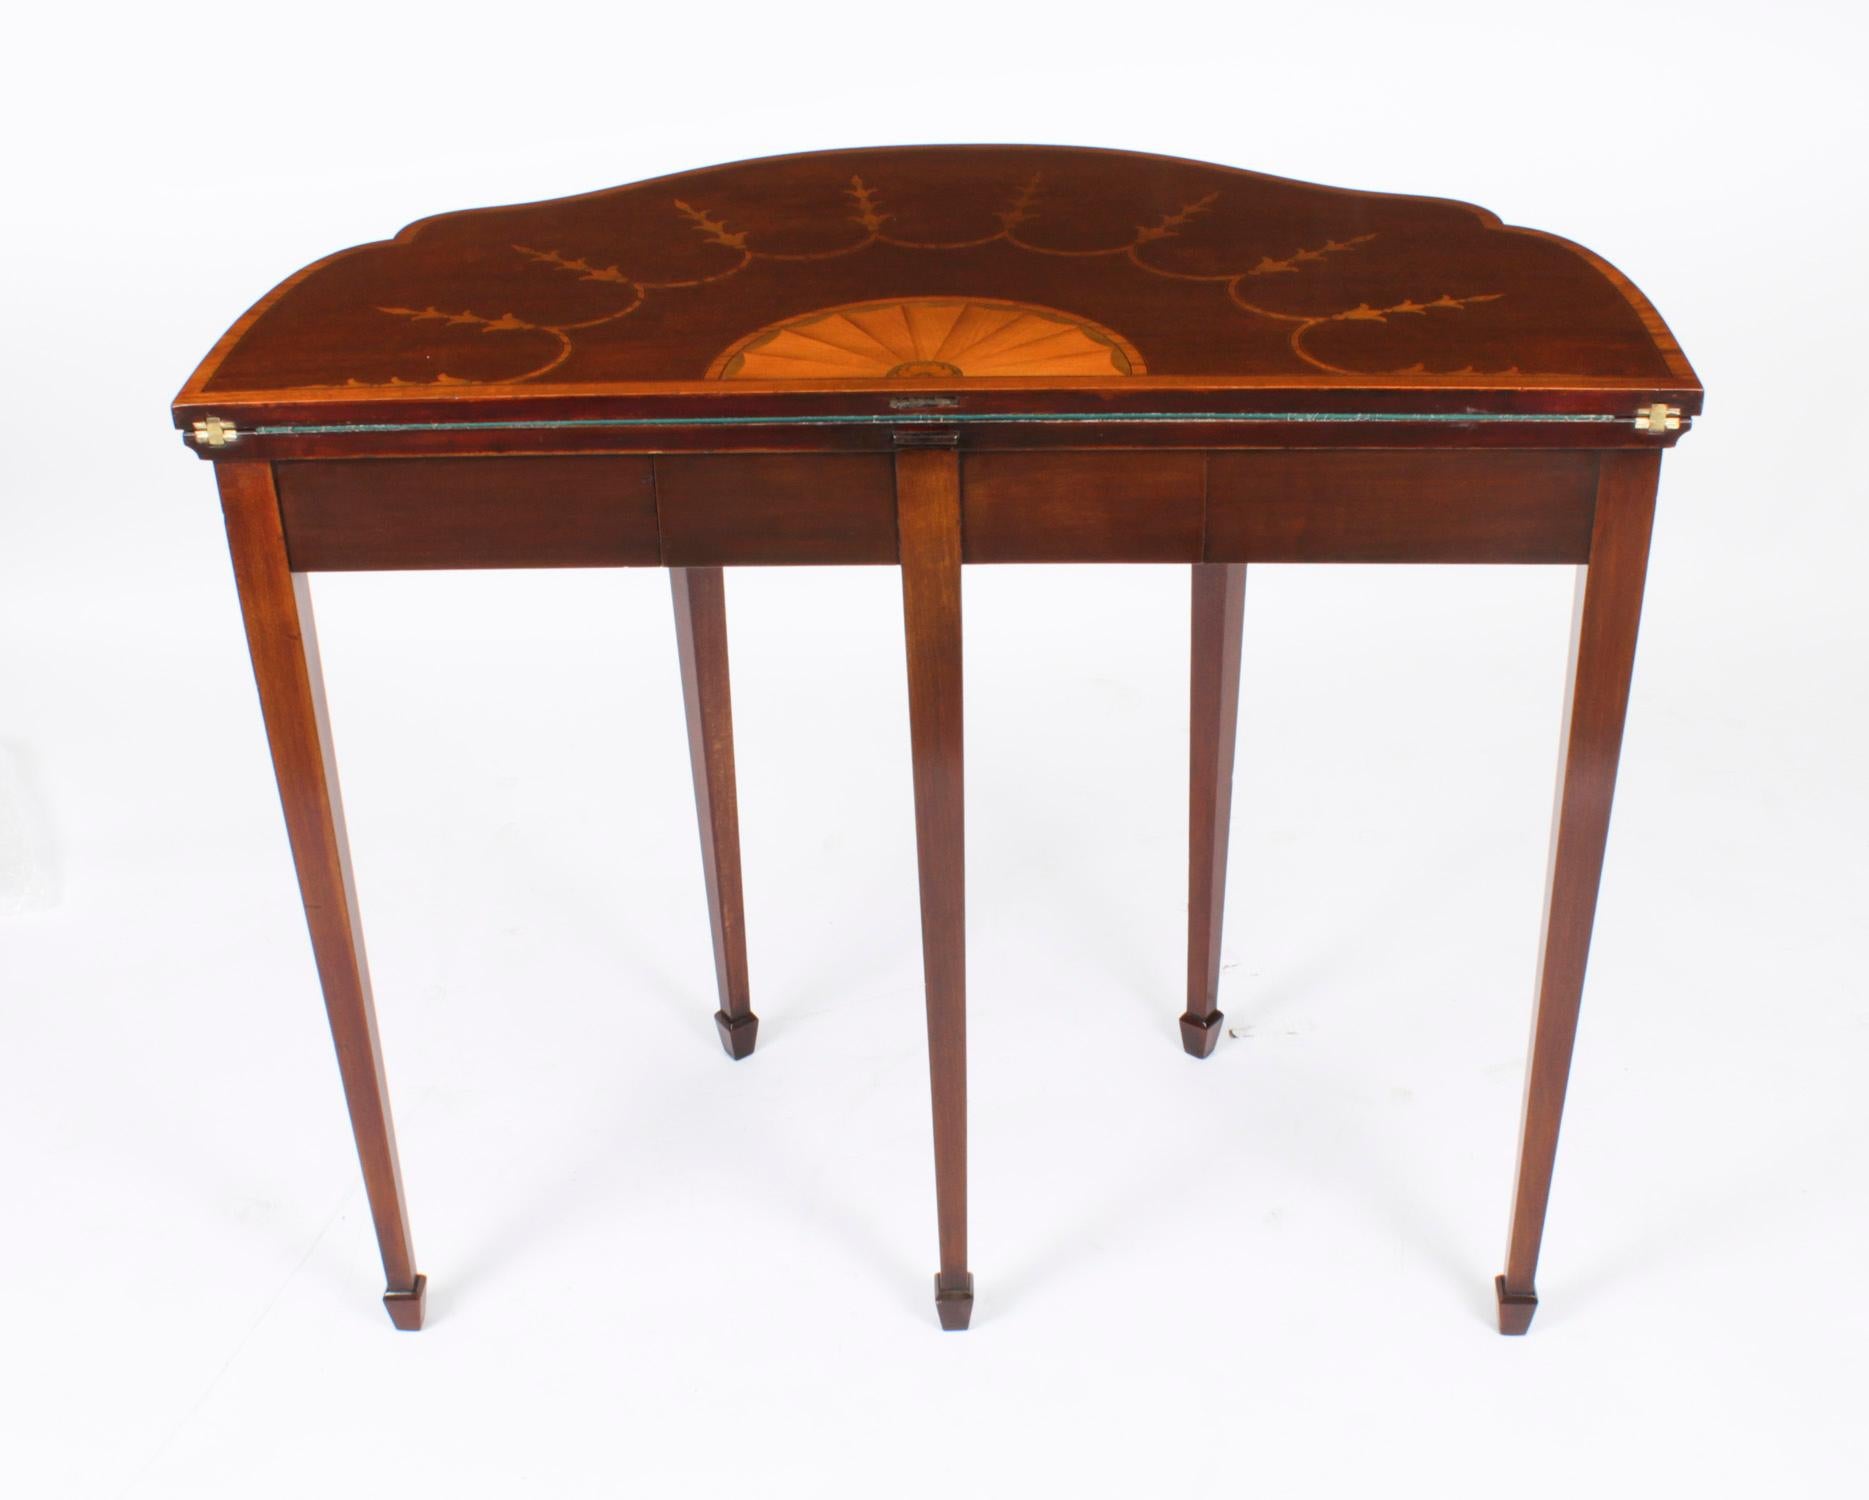 Antique Mahogany and Satinwood Inlaid Serpentine Card Console Table 19th Century For Sale 14